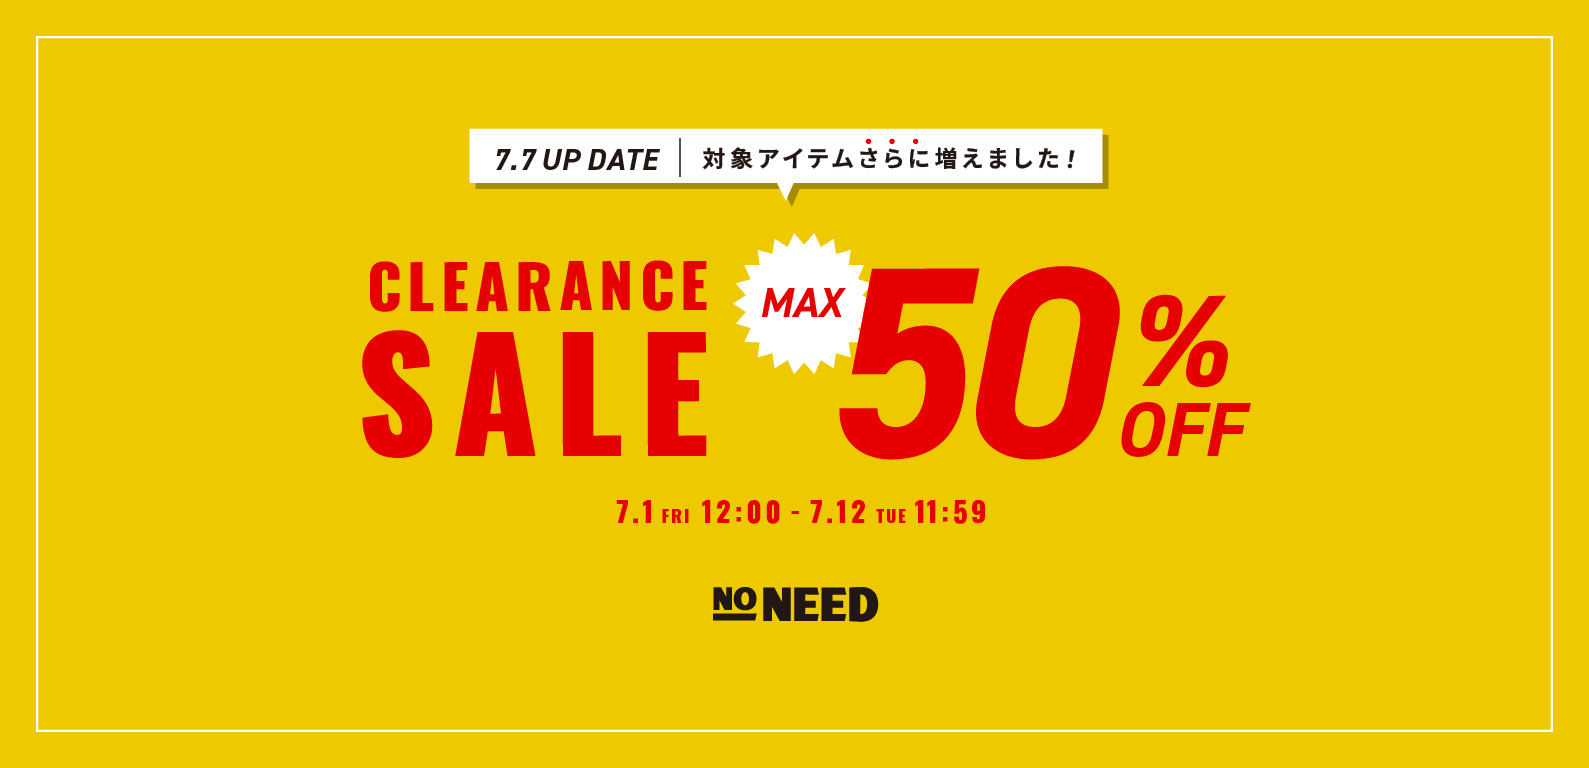 NONEED | CLEARANCE SALE